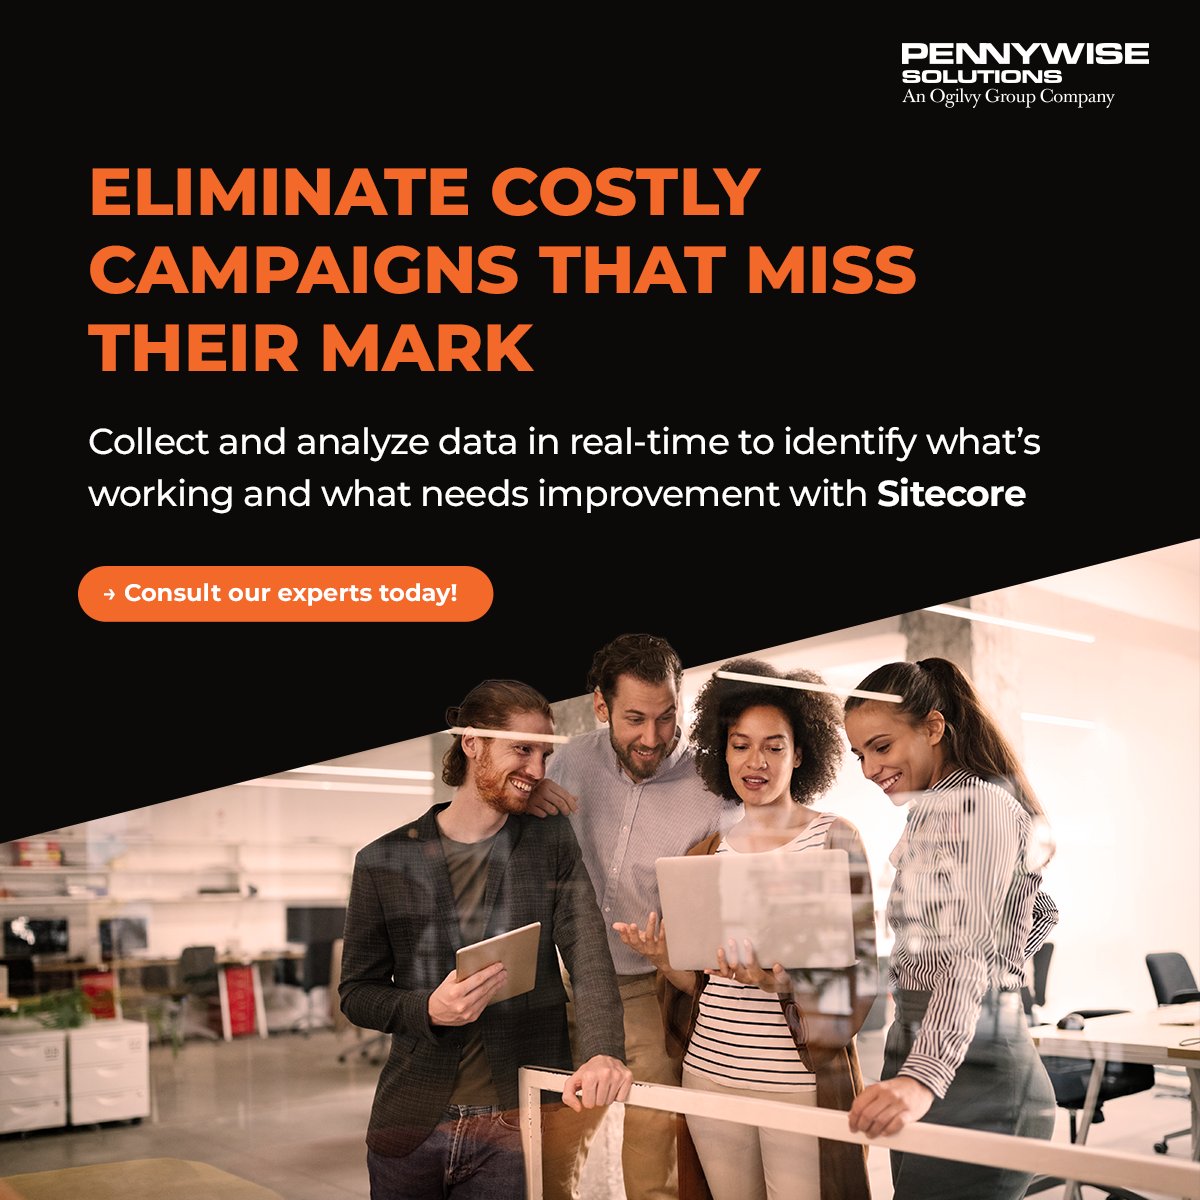 Inefficiency at organizations can lead to huge costs that impact the company’s bottom line. With #Sitecore, centralize all your digital assets and deliver them to relevant customers in real-time. To set up or migrate your online store, visit bit.ly/3ypAFDP #PennyWise